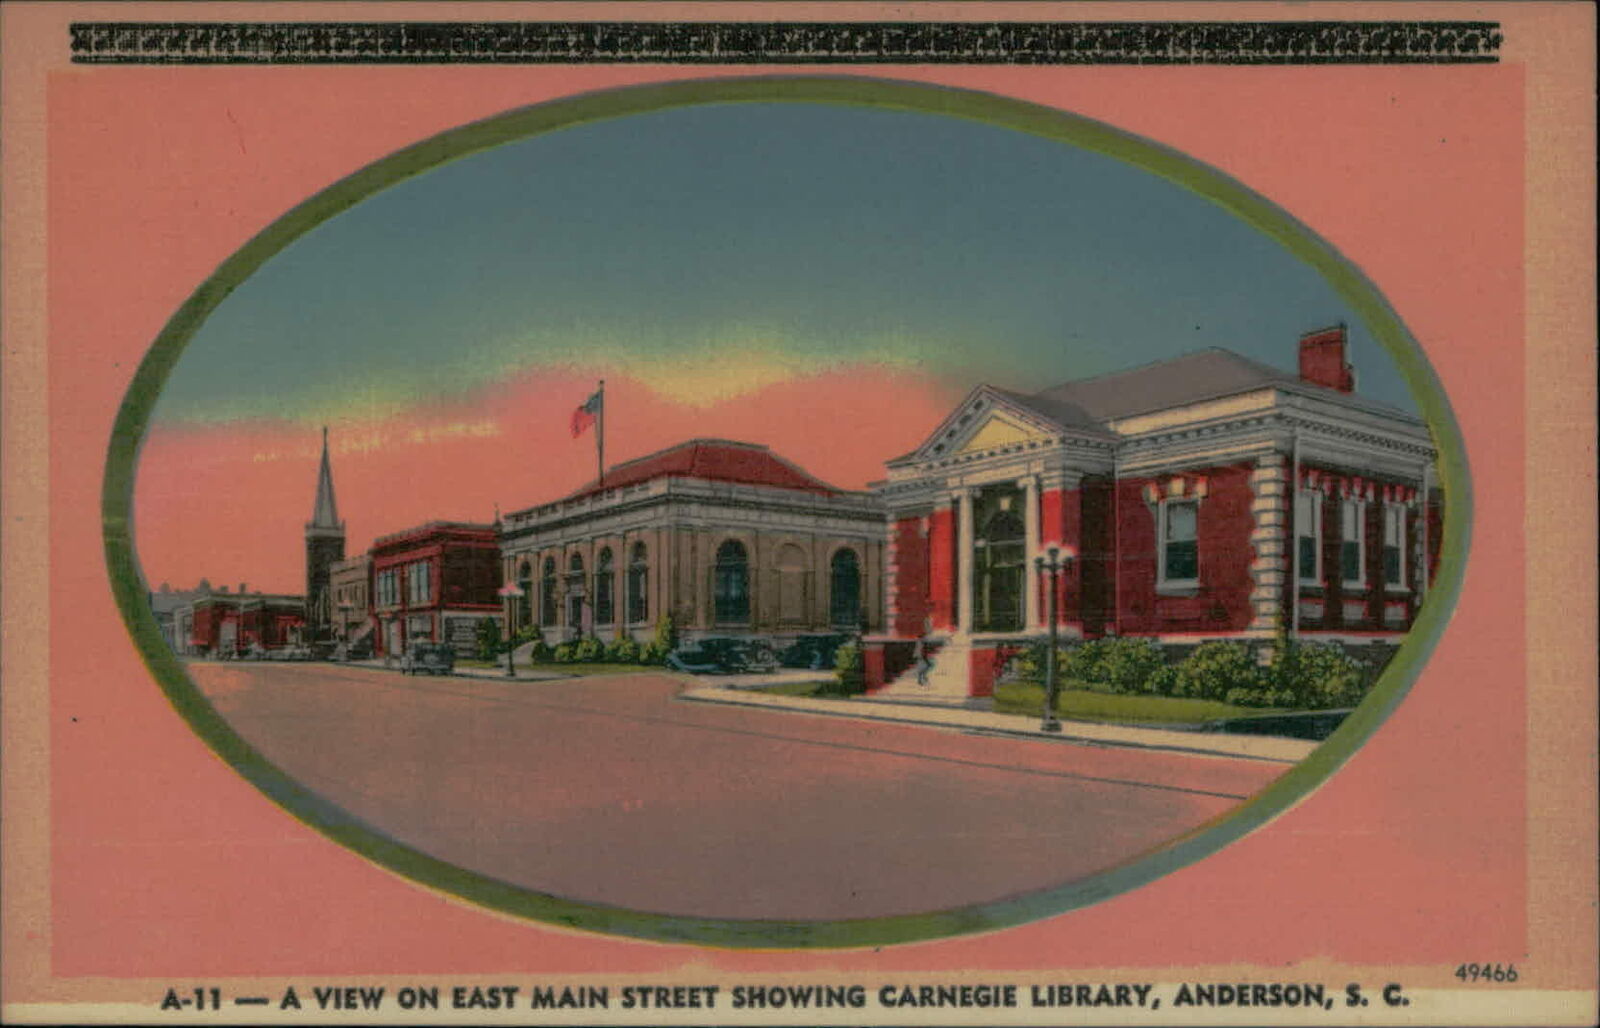 Postcard: JHL AM A-11-A VIEW ON EAST MAIN STREET SHOWING CARNEGIE LIBR